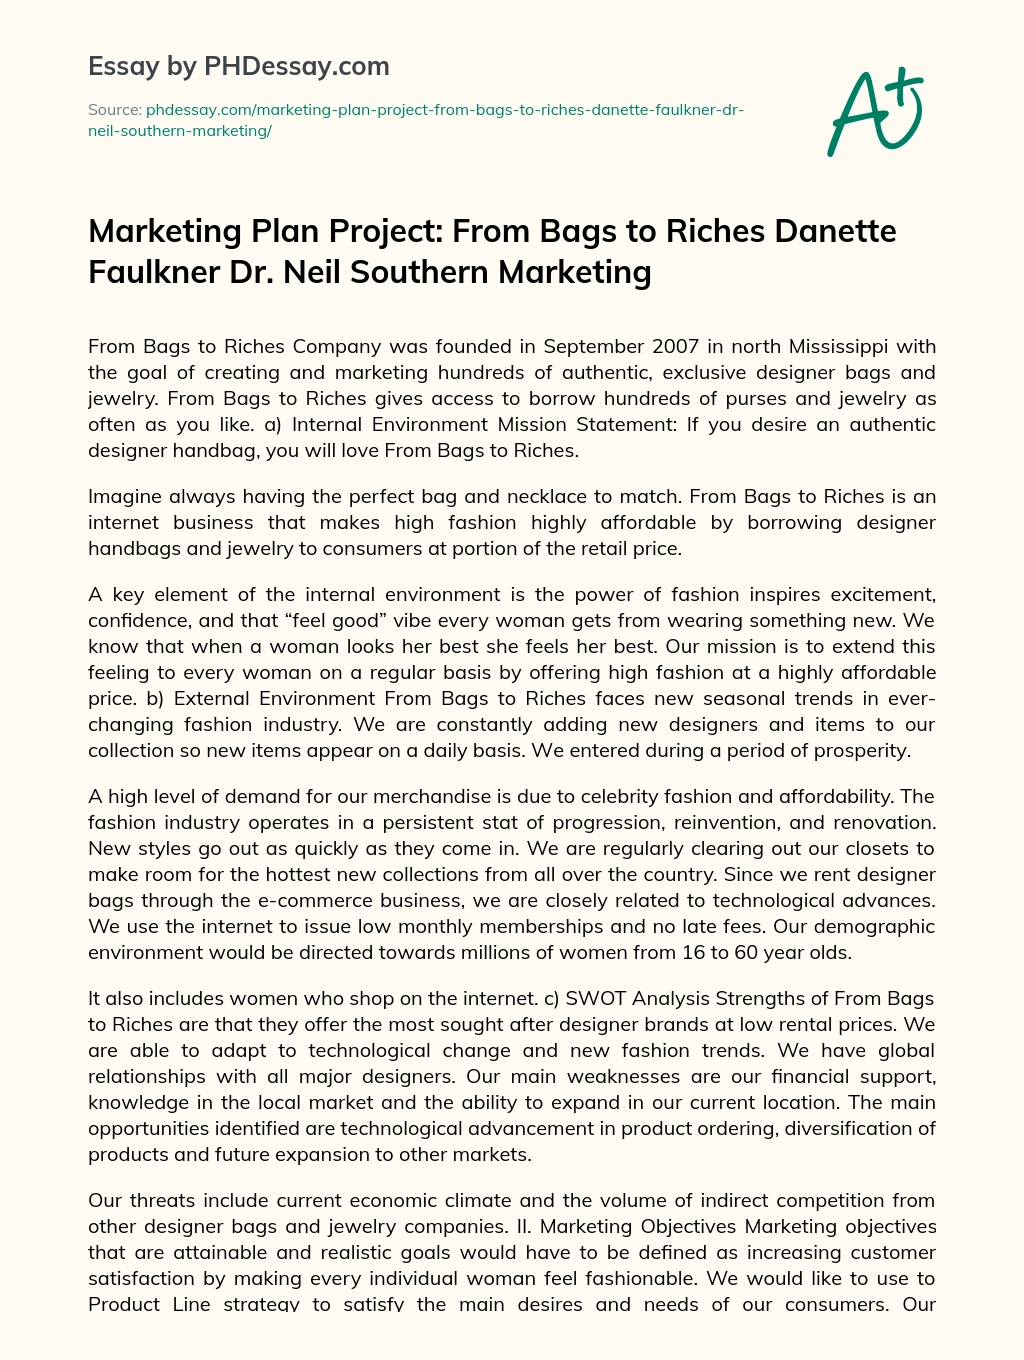 Marketing Plan Project: From Bags to Riches Danette Faulkner Dr. Neil Southern Marketing essay